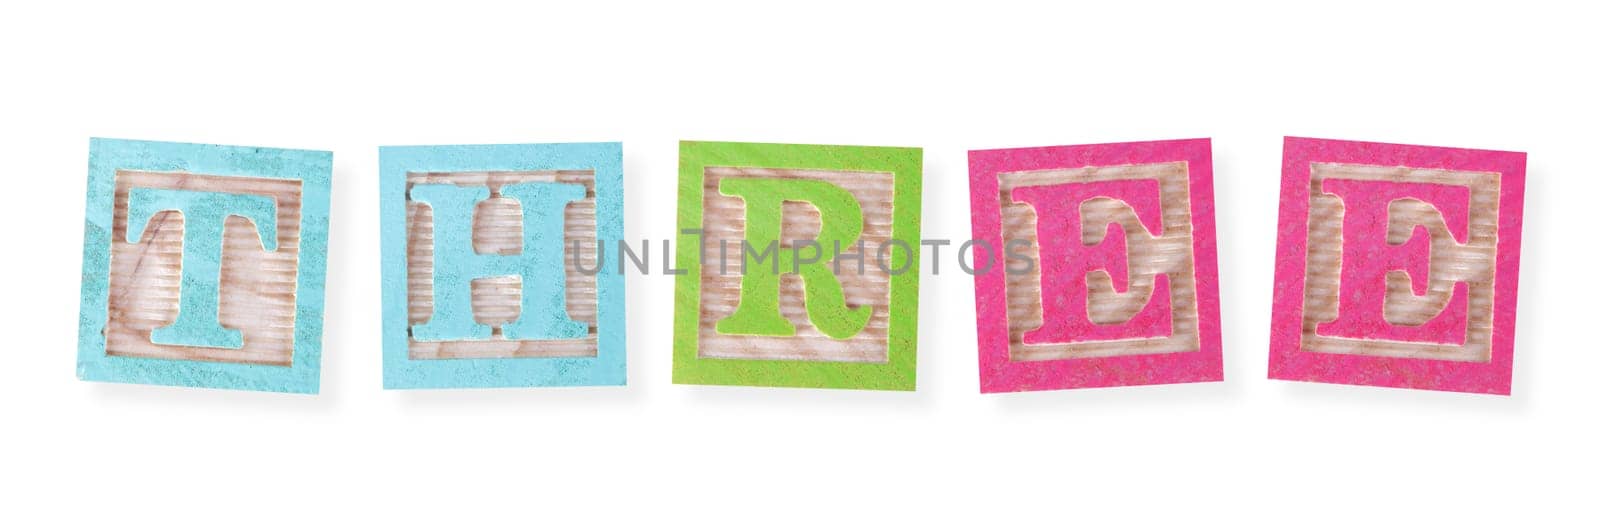 Three concept with childs wood blocks by VivacityImages